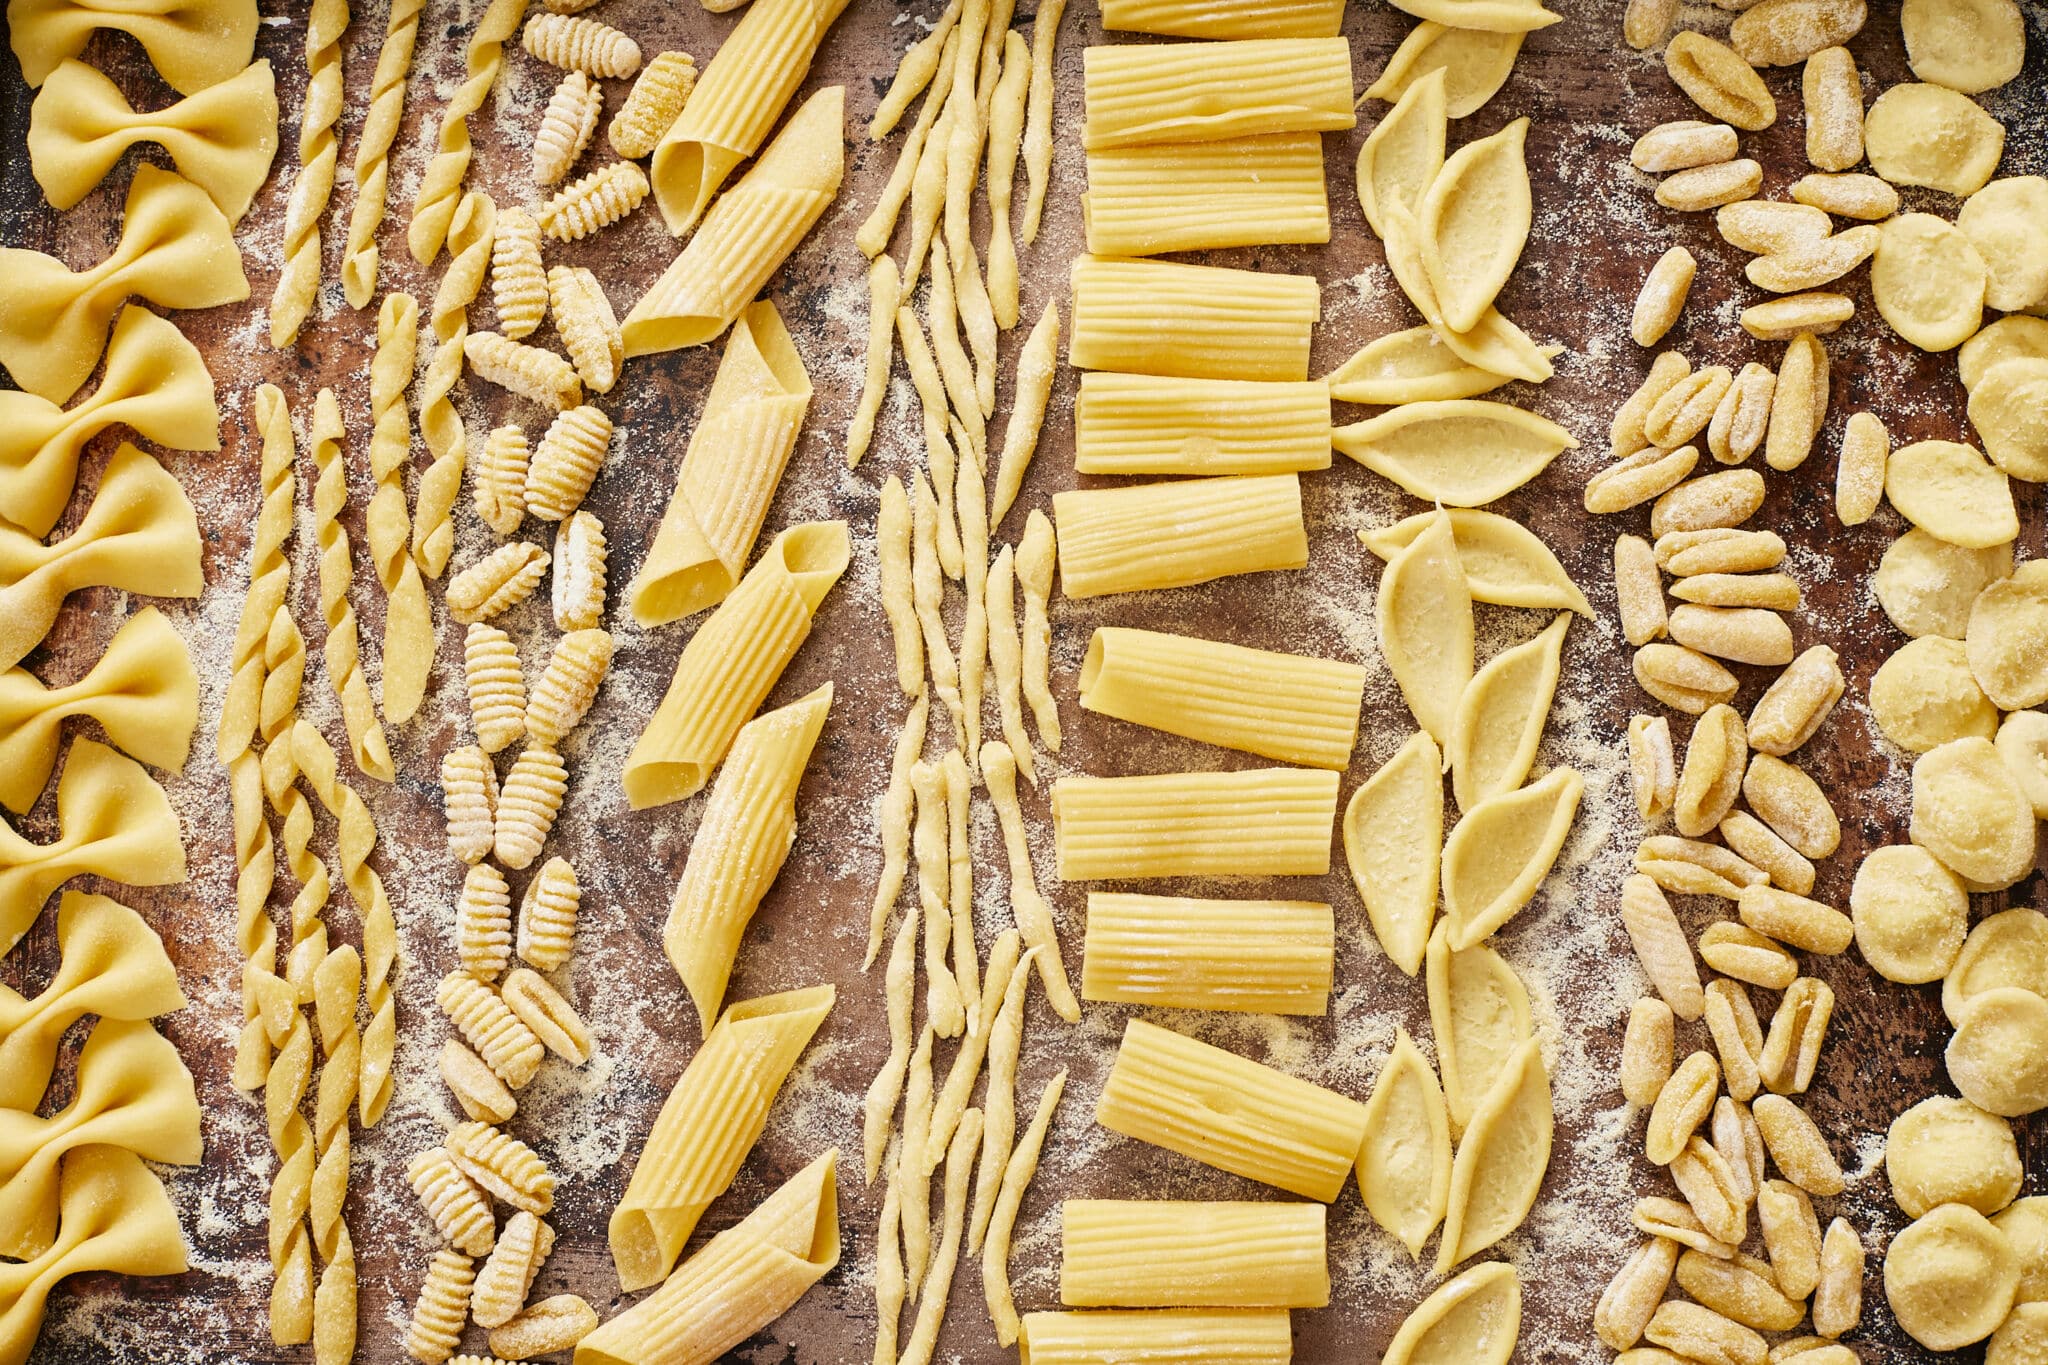 2-Ingredient Semolina Pasta is made into 9 pasta shapes, drying on a lightly floured surface. Farfalle (bow ties), Busiate (spiral), Gnocchetti (ridged small elongated shell), Penne (smooth tubes), Trofie (twisted pasta), Rigatoni (ribbed tubes), Foglie (olive leaf), Cavatelli (mini hot dog bun), and Orecchiette (small ears).